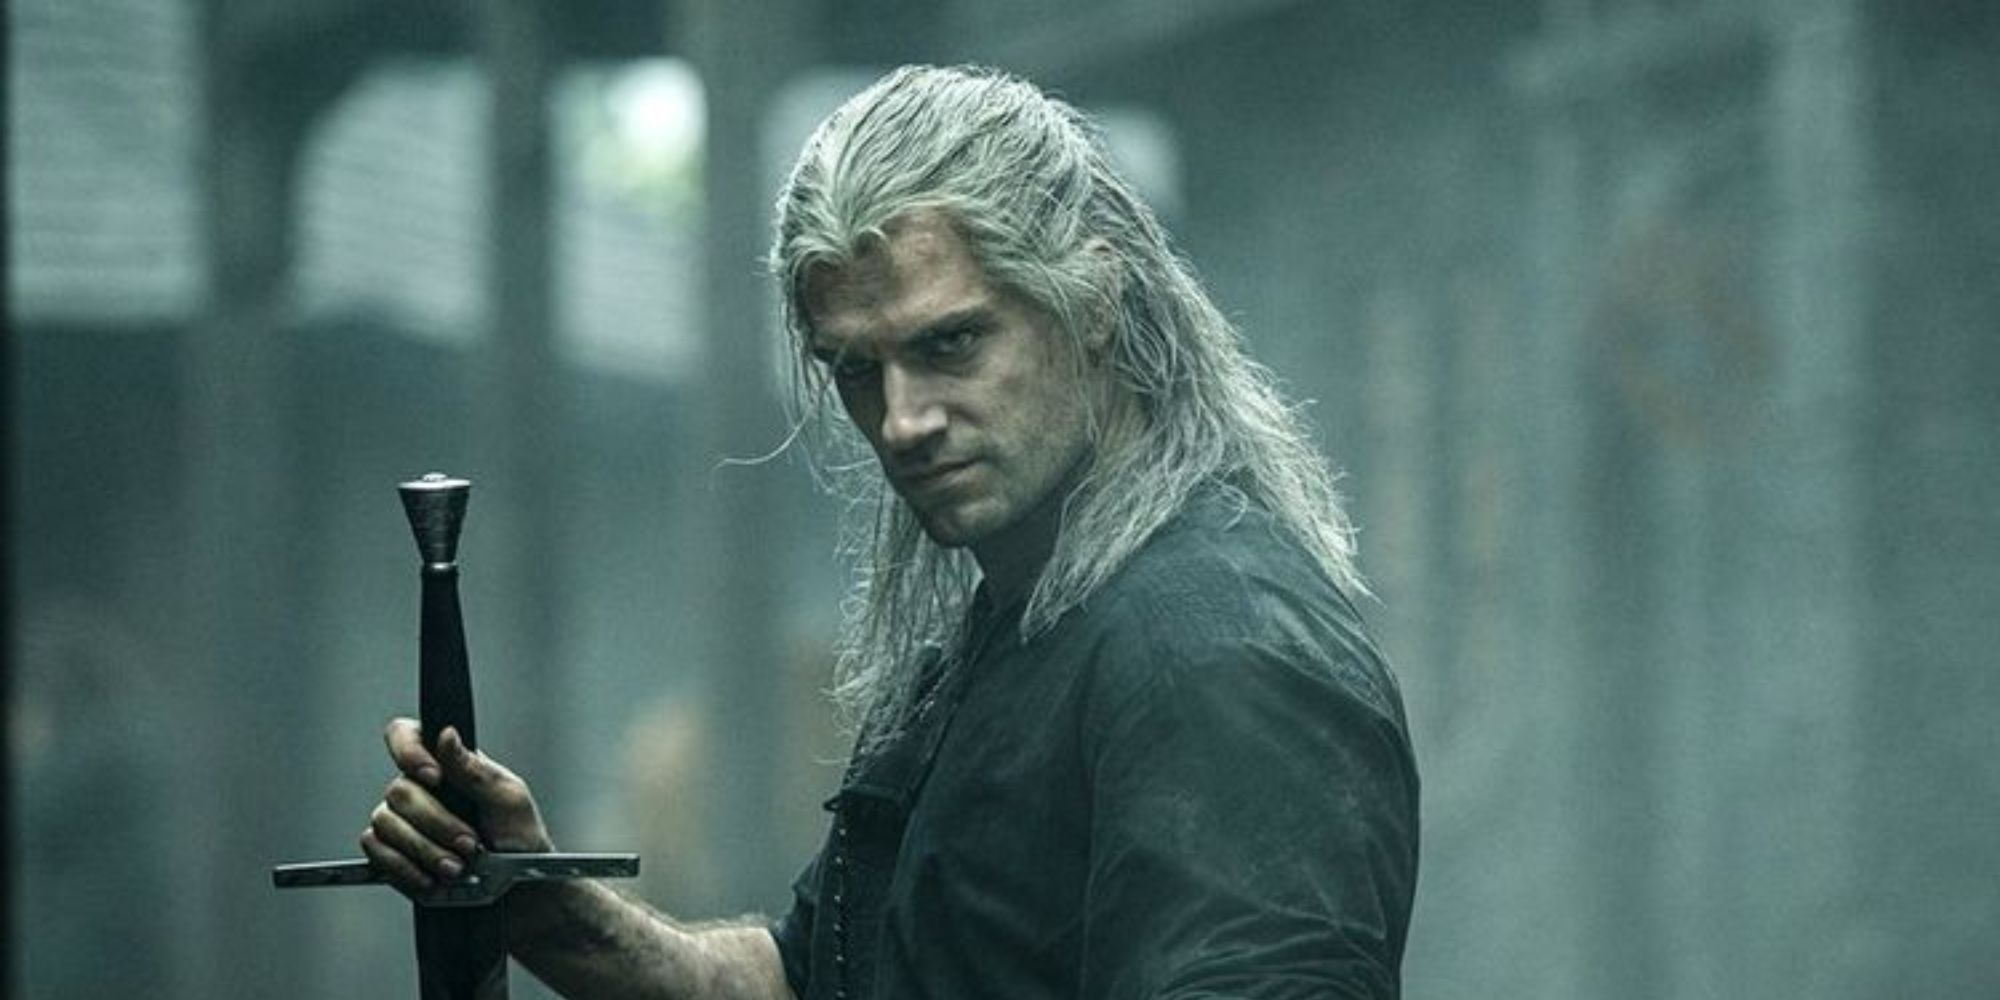 Henry Cavill as Geralt of Rivia holding his sword and looking at something off-camera in the Witcher